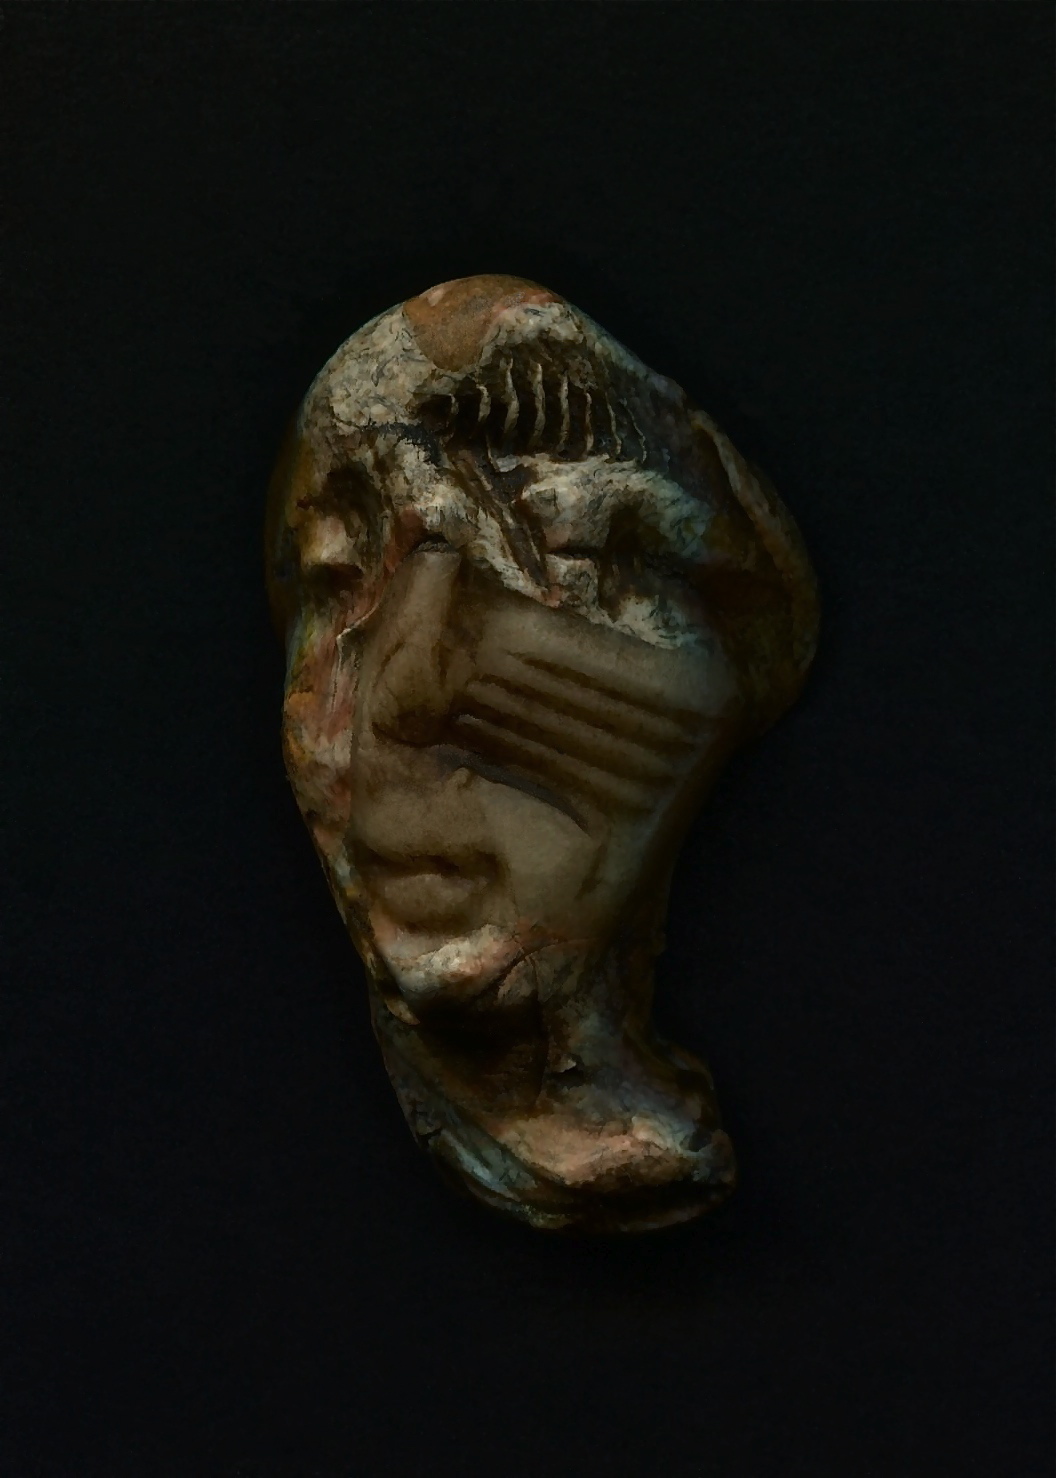 an old silver clay face on display in a dark room